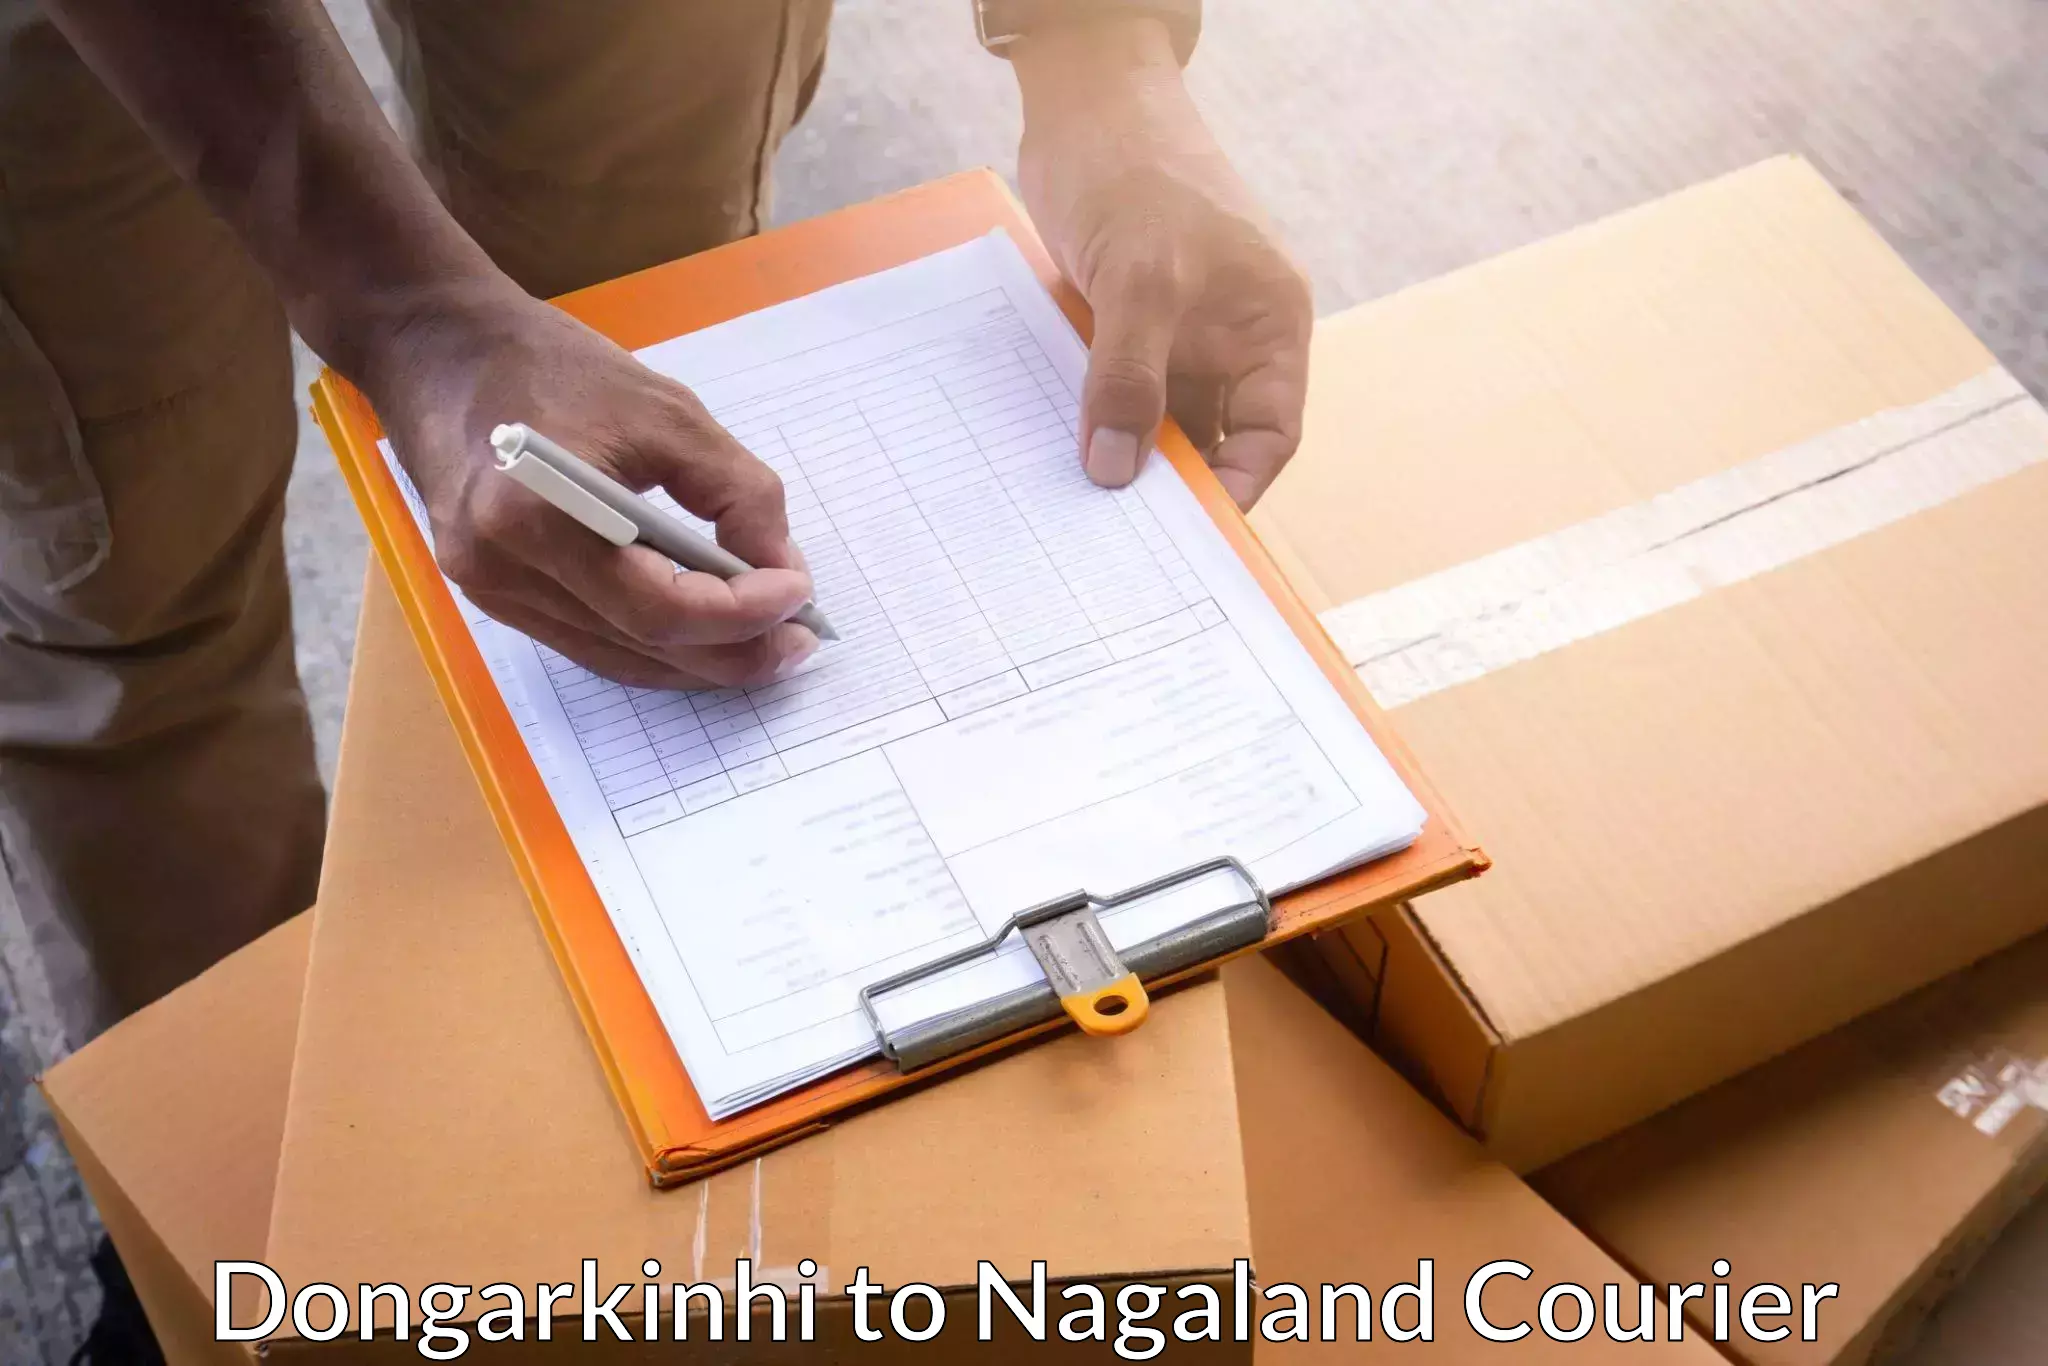 Nationwide courier service Dongarkinhi to Dimapur